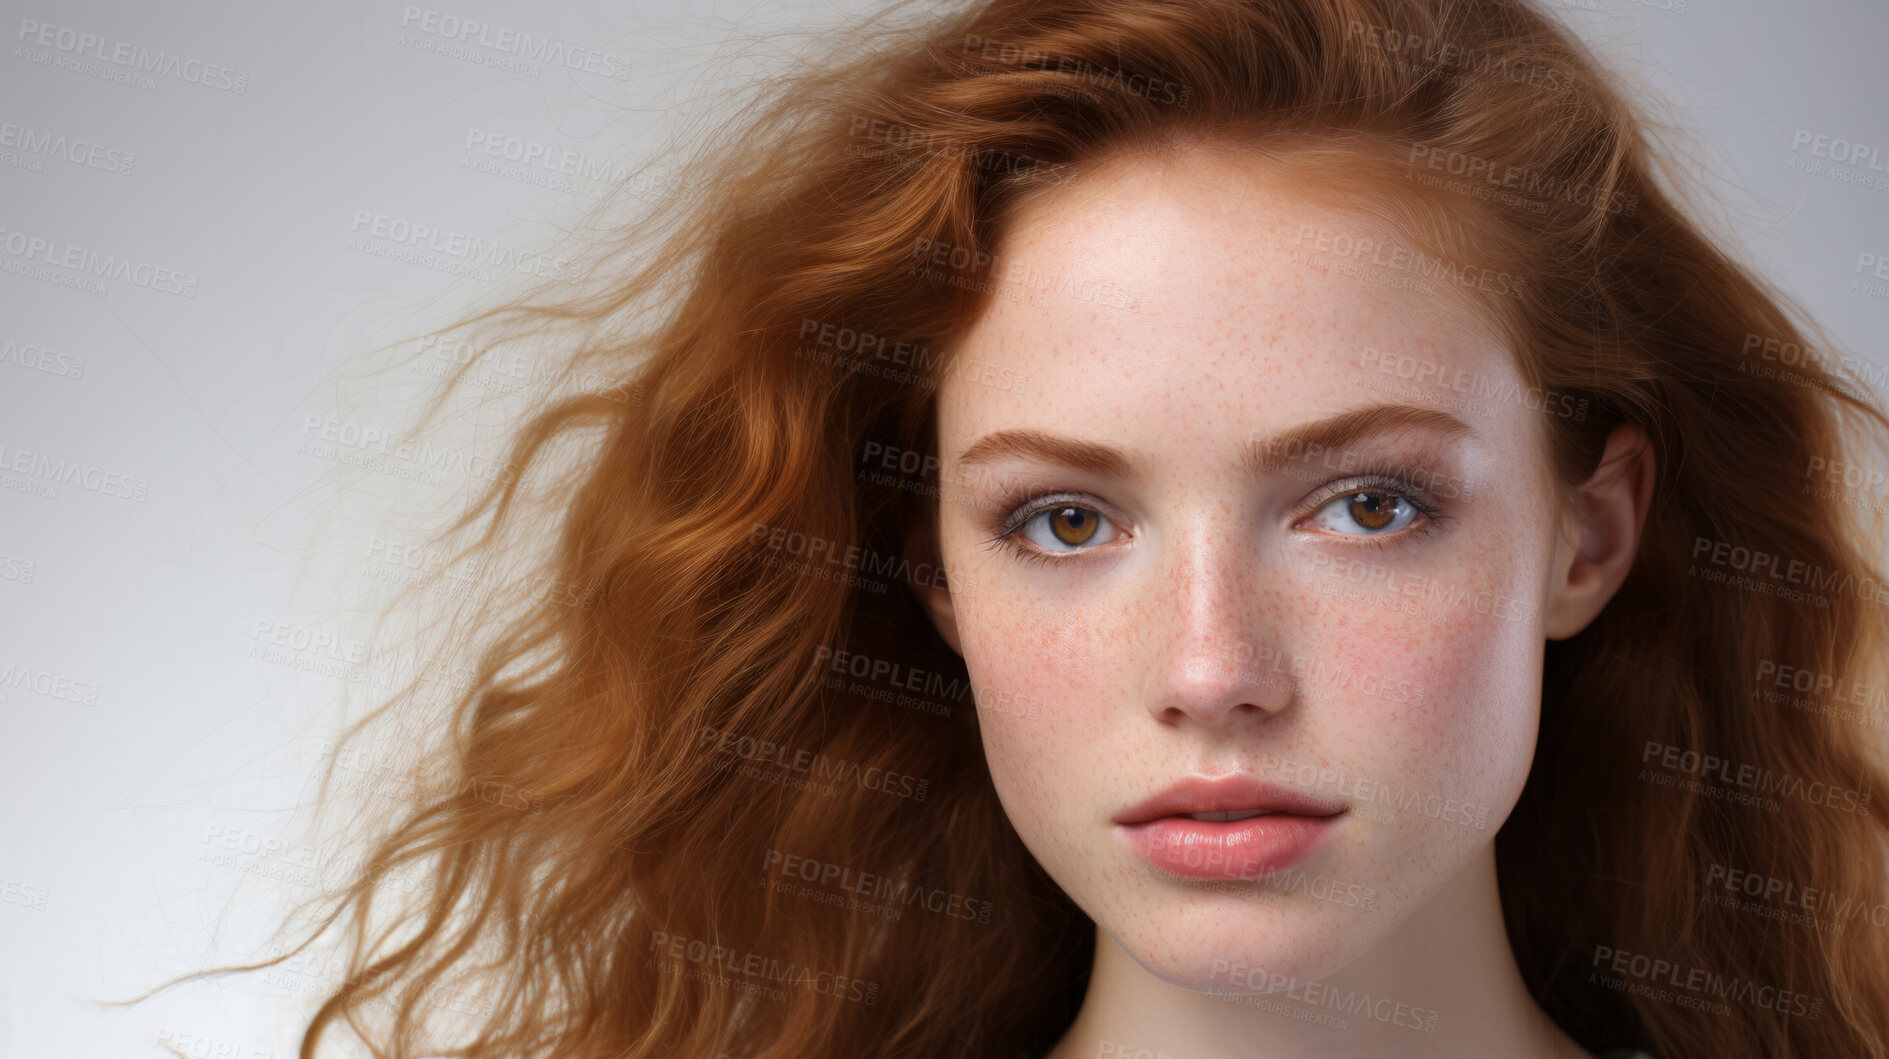 Buy stock photo Portrait of model. Make-up, freckle skin. Natural light. Fashion, editorial concept.